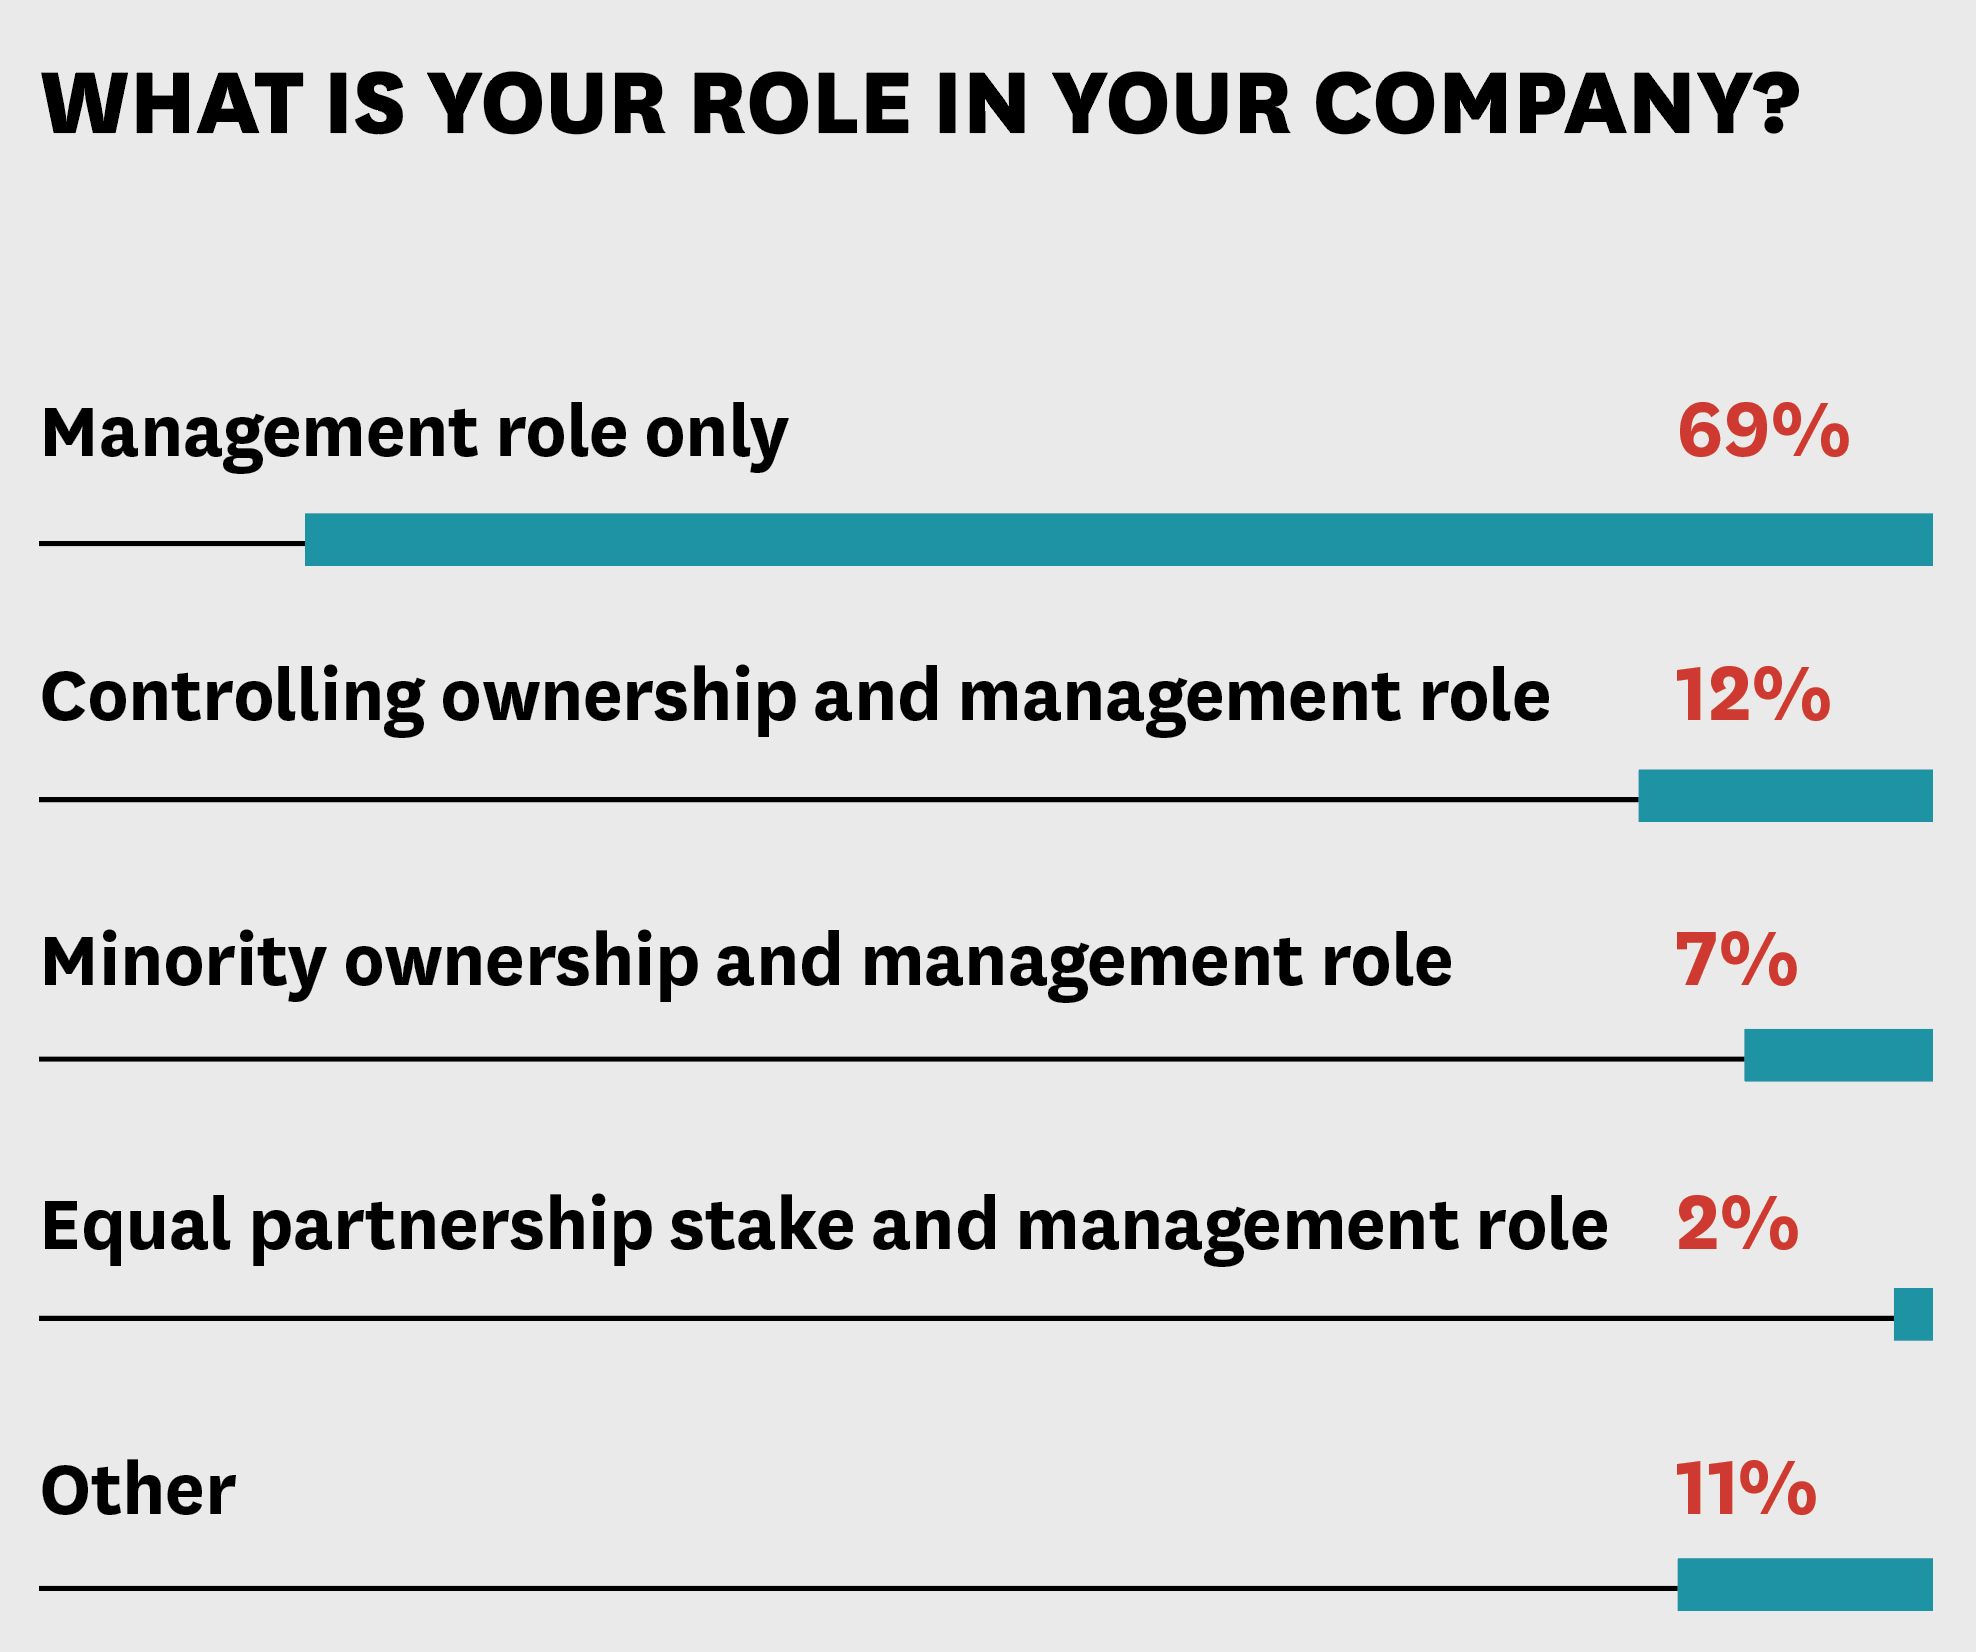 What is your role in your company